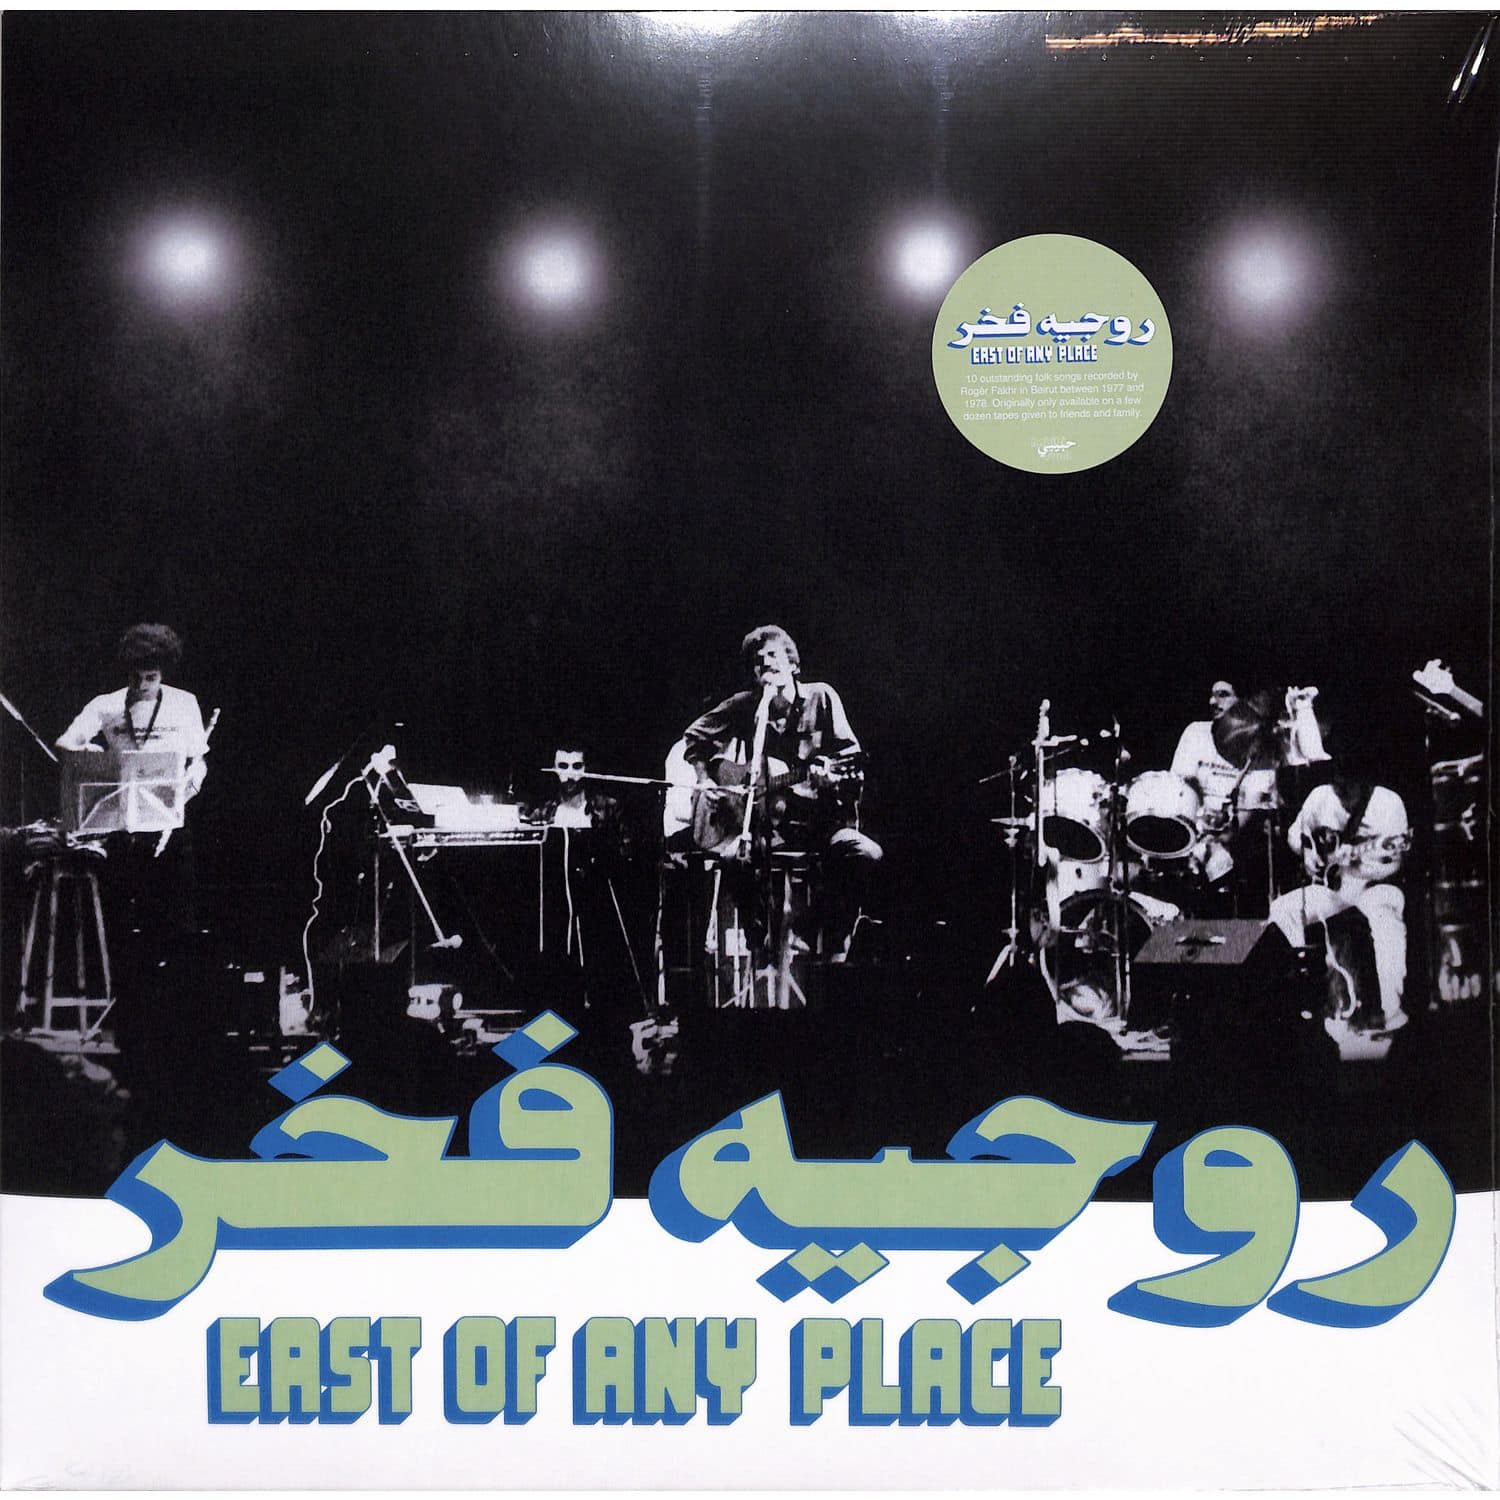 Roger Fakhr - EAST OF ANY PLACE 